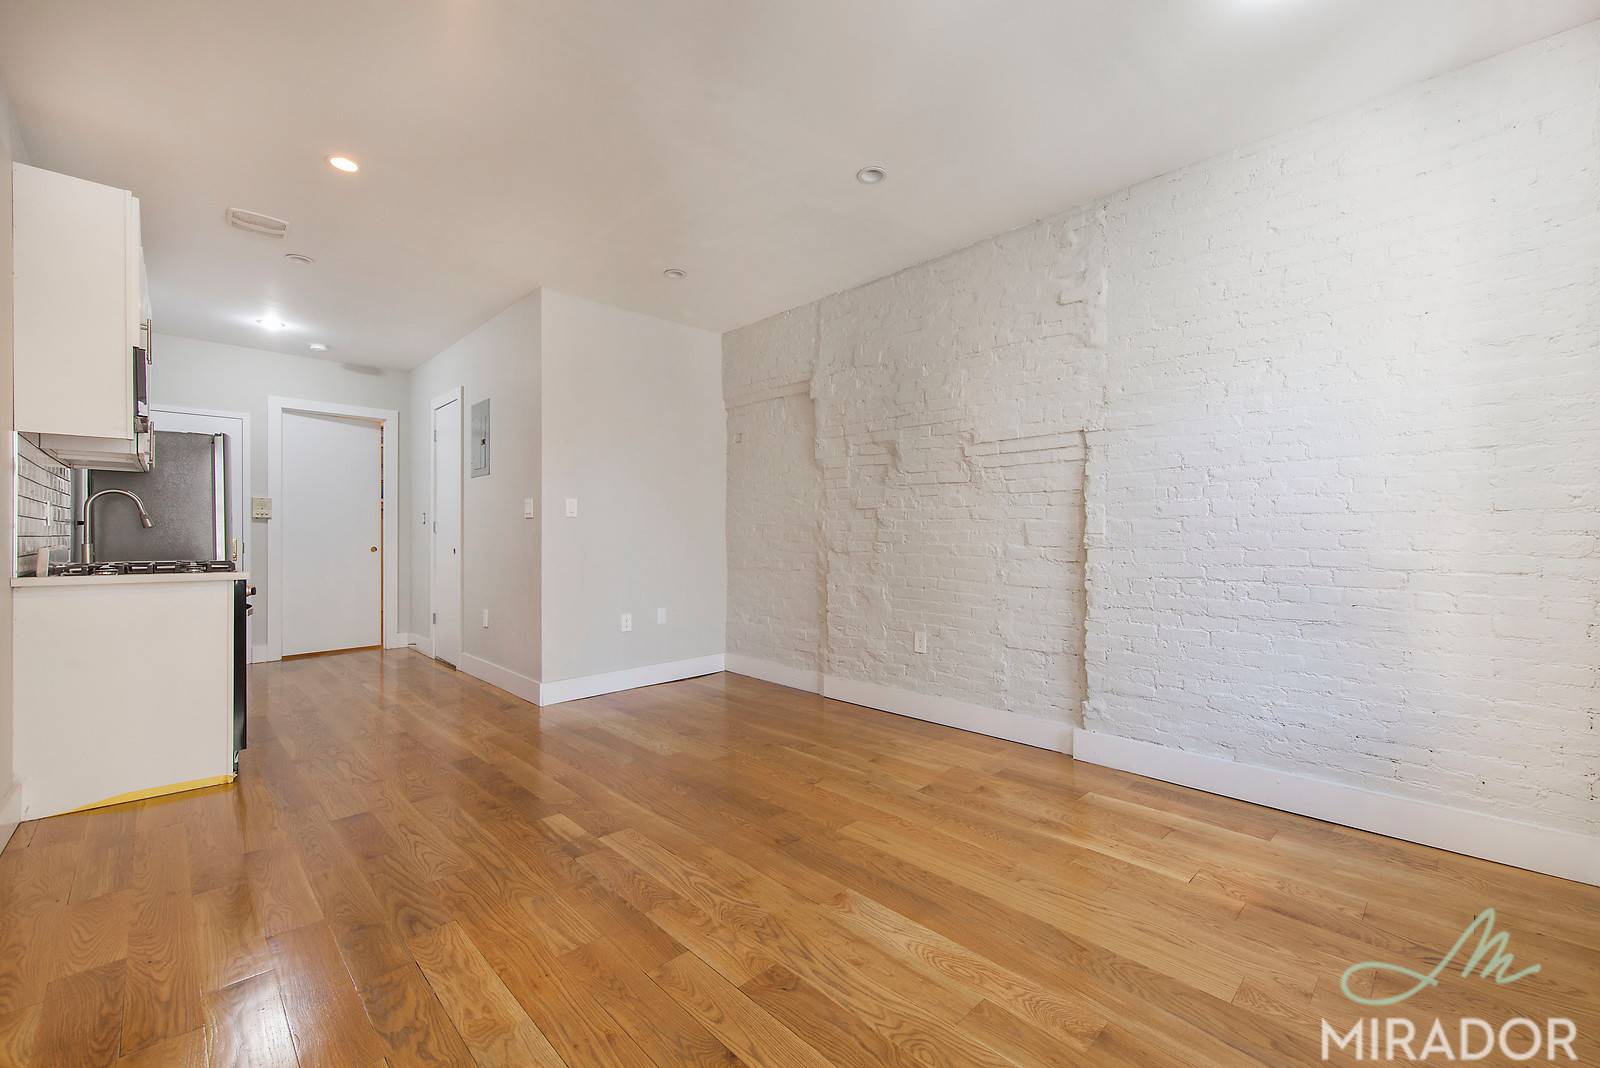 Ready for ASAP move in No Broker Fee to Mirador This is a fantastic FULL GUT RENO, 2 bedroom 1 bath apartment located in the heart of fabulous SoHo ; ...